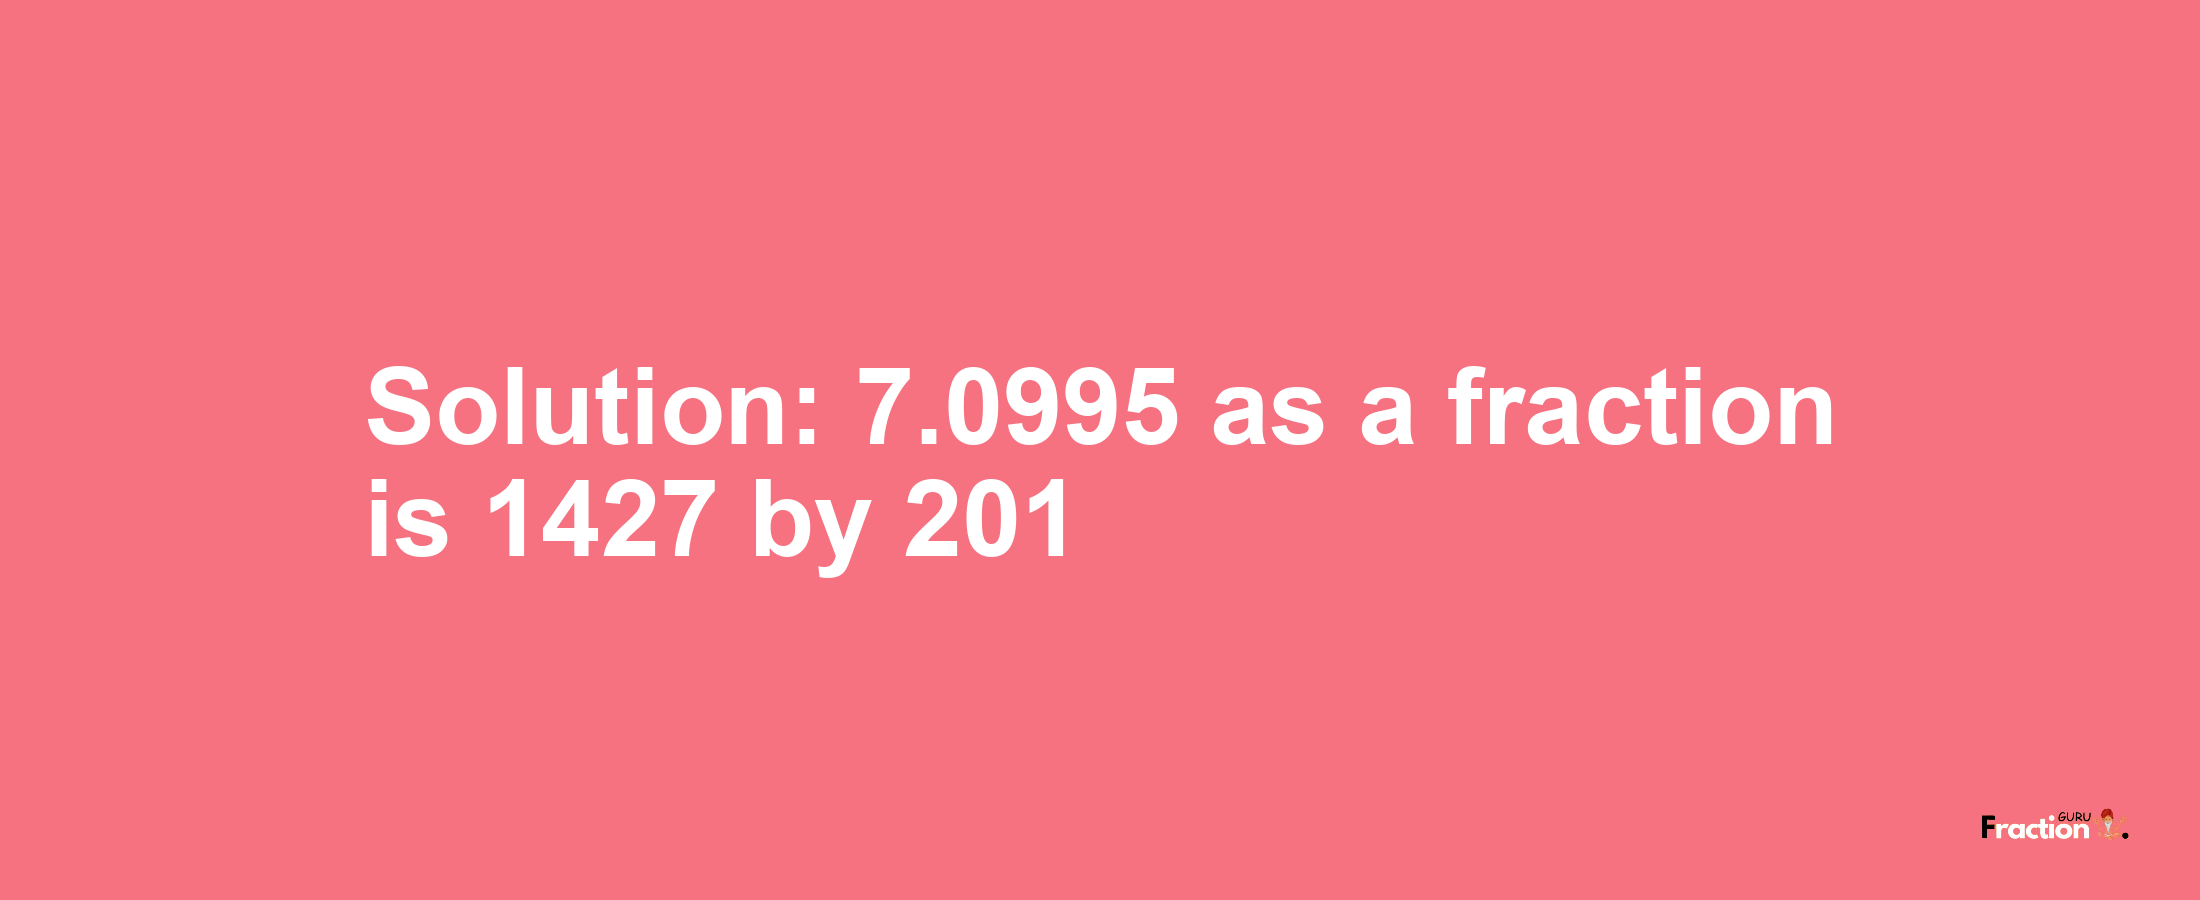 Solution:7.0995 as a fraction is 1427/201